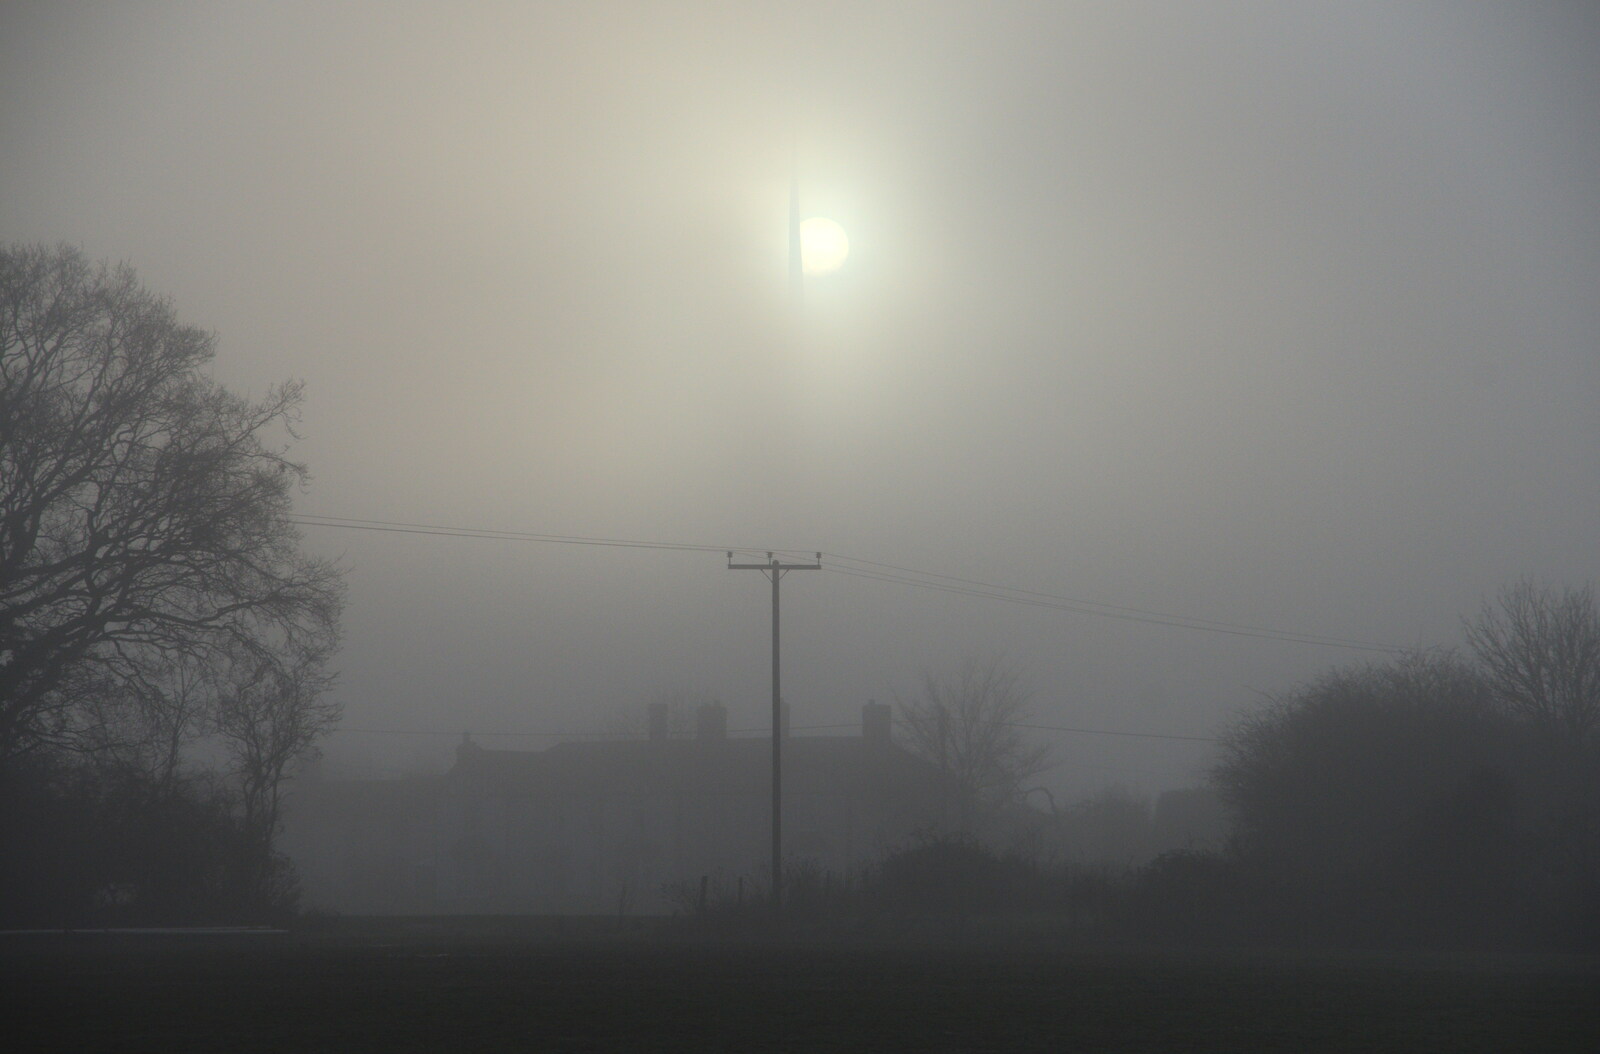 The blade of a turbine chops the sun from A Virtual New Year's Eve, Brome, Suffolk - 31st December 2020